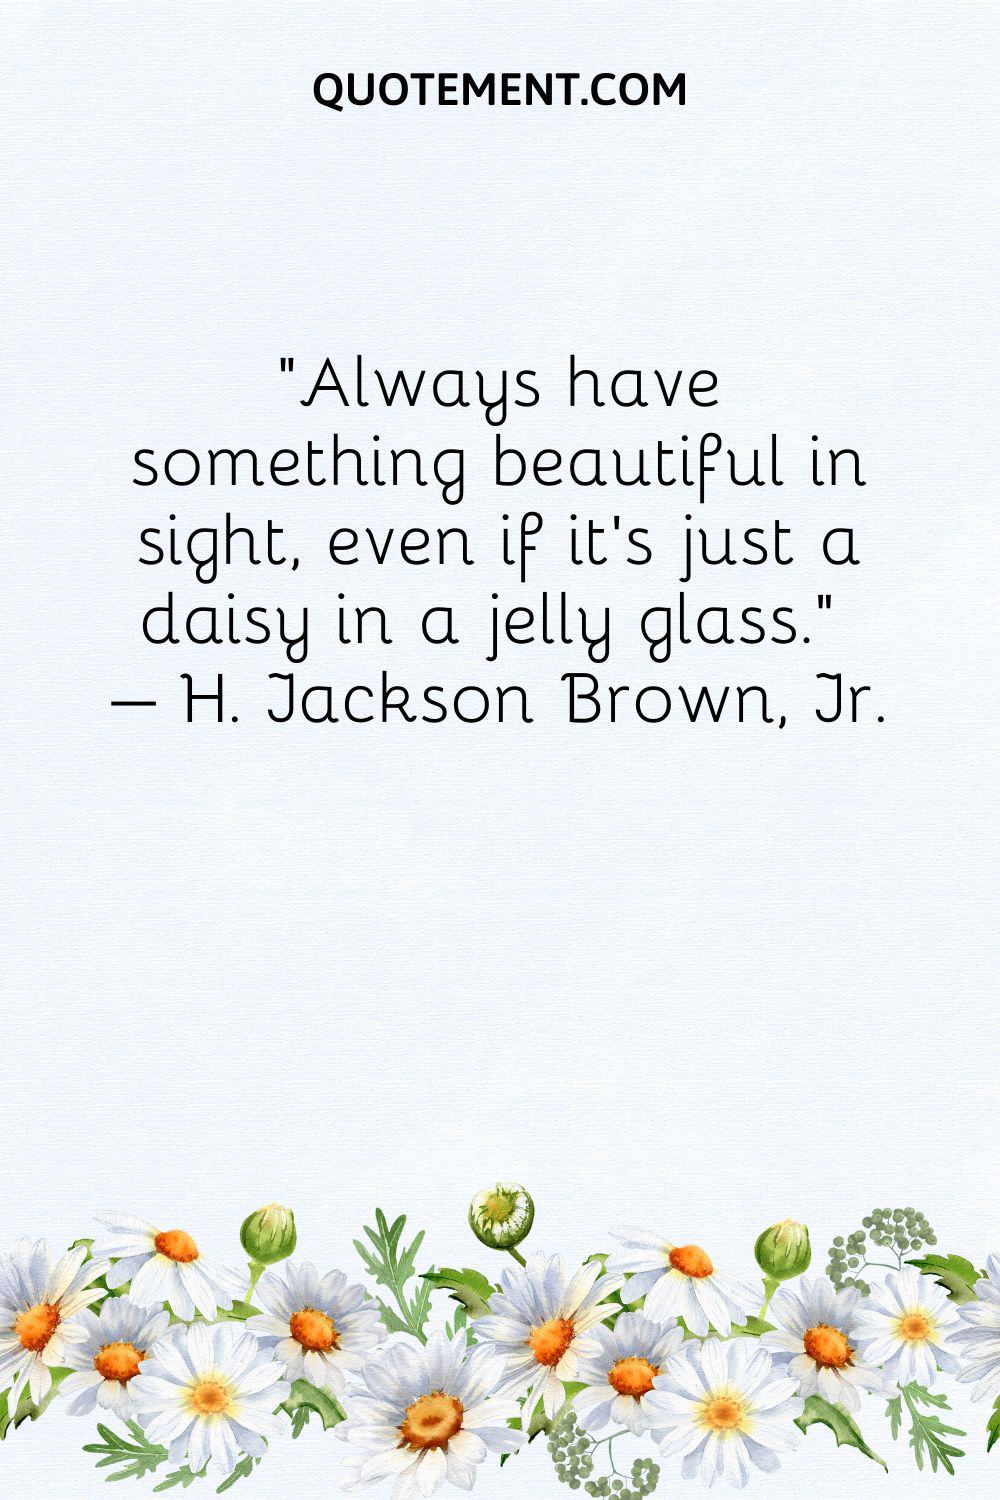 Always have something beautiful in sight, even if it's just a daisy in a jelly glass